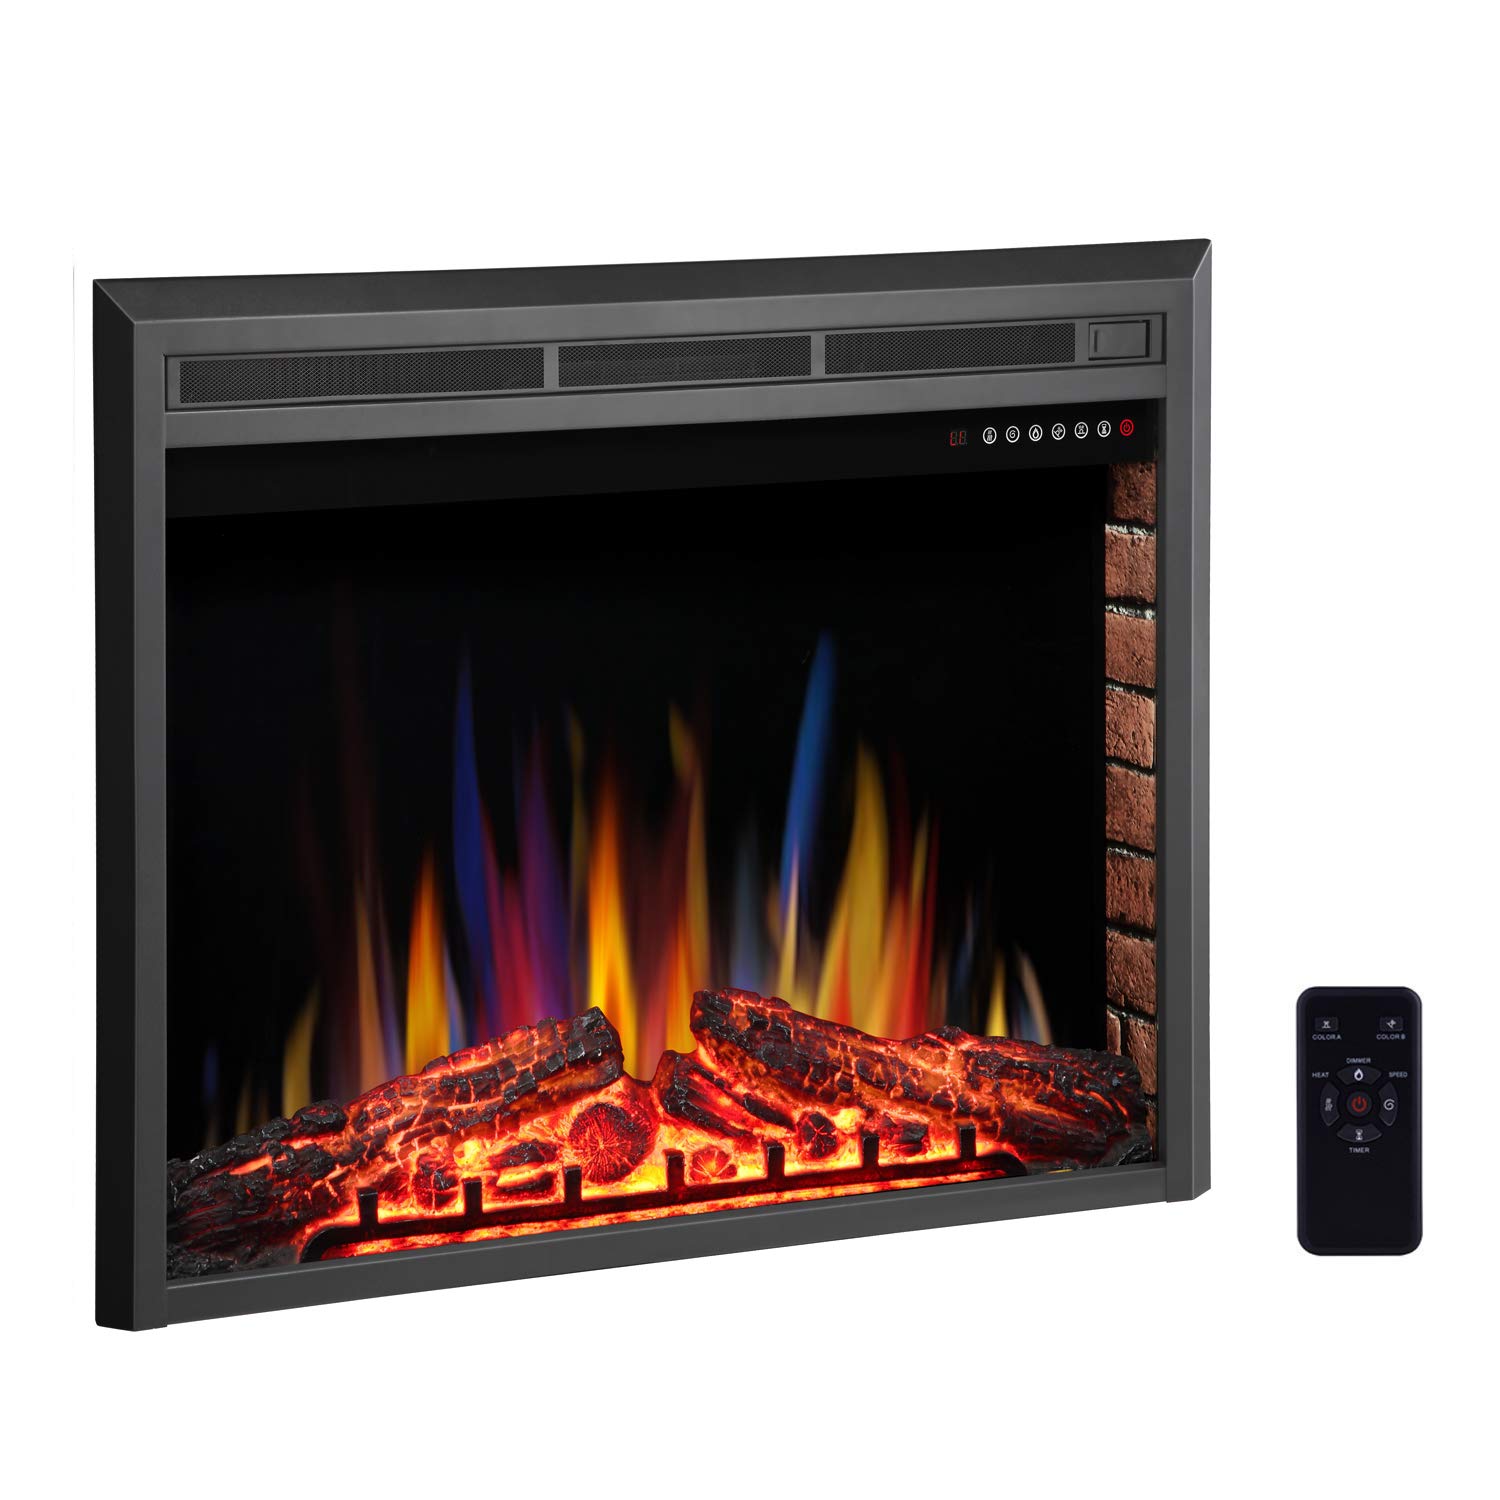 Best Electric Fireplace Logs Inspirational Rwflame 28" Electric Fireplace Insert Freestanding & Recessed Electric Stove Heater touch Screen Remote Control 750w 1500w with Timer & Colorful Flame